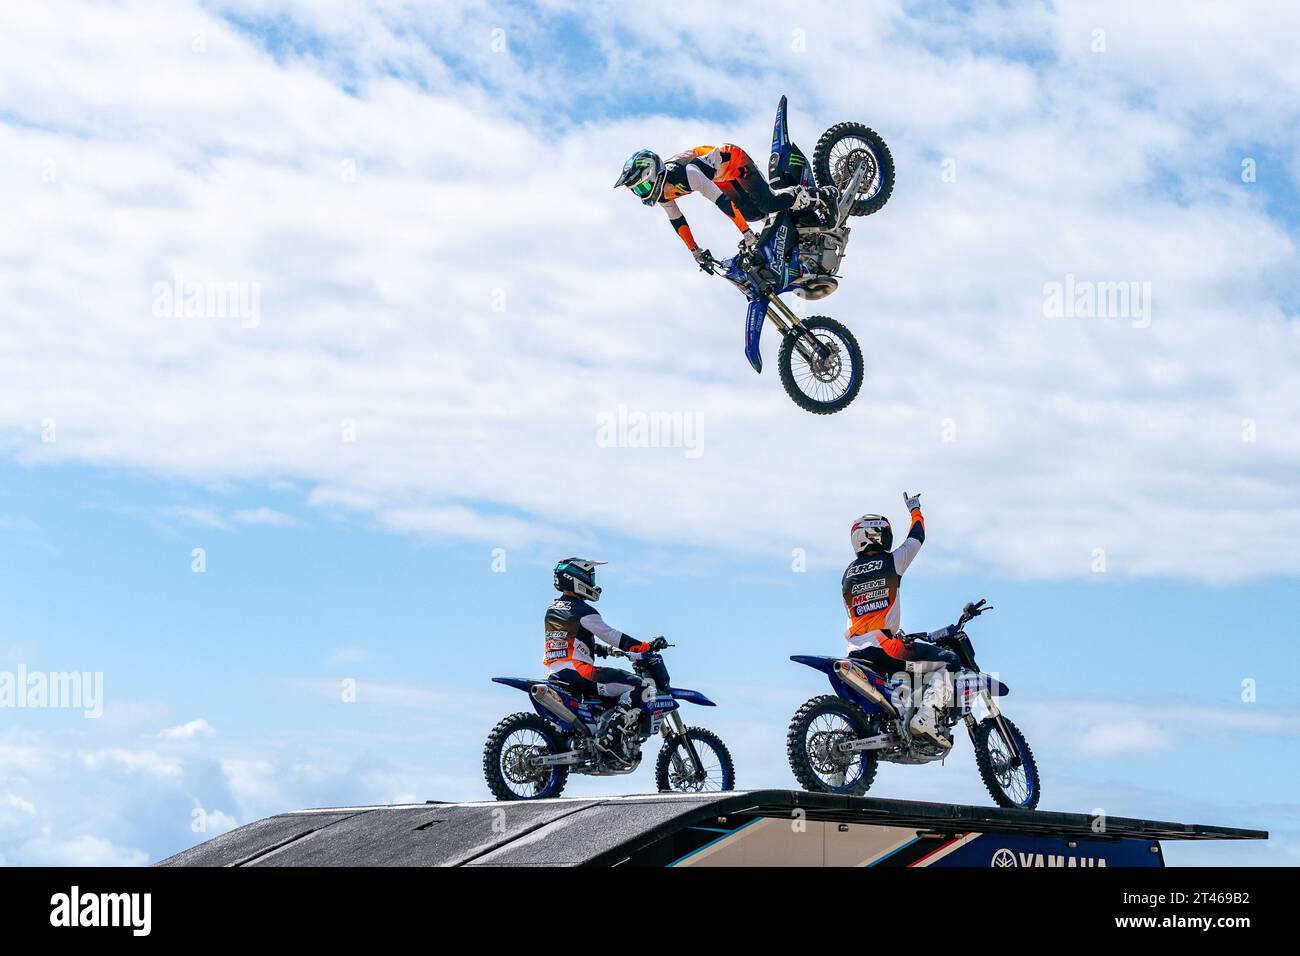 About Us  Airtime FMX